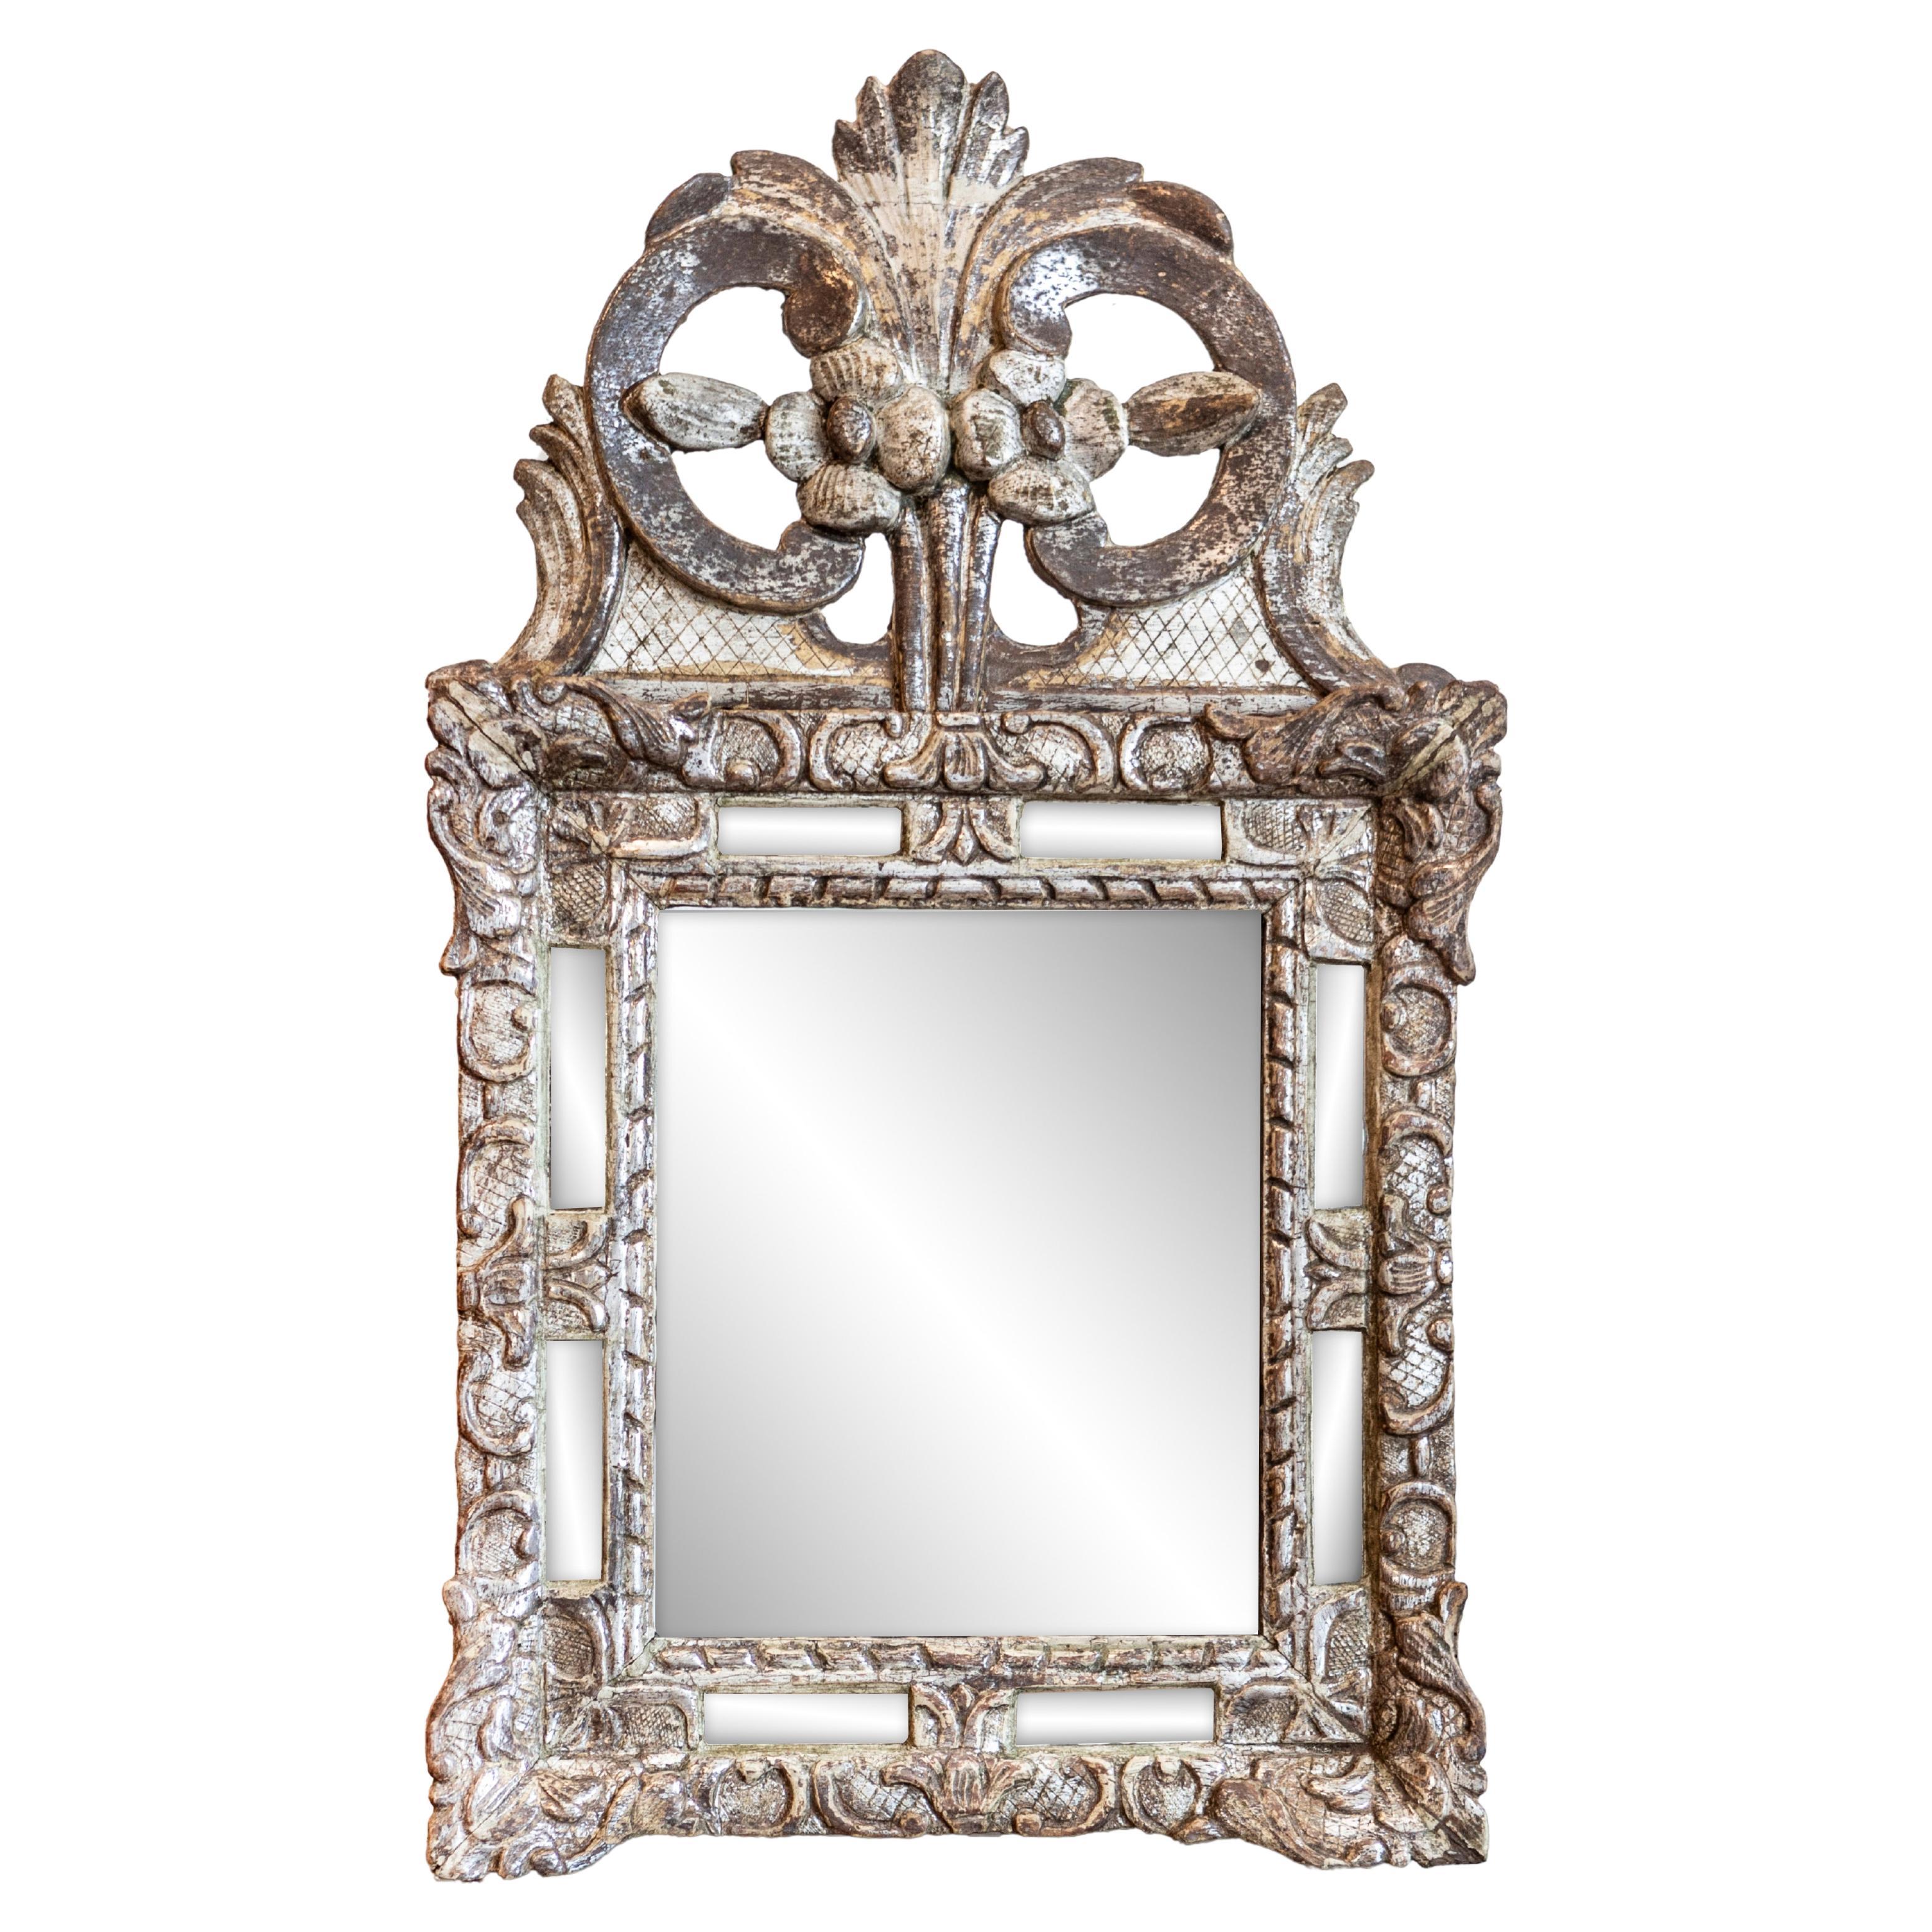 Régence 18th Century French Silver Parcel Gilt Mirror with Floral Carved Crest For Sale